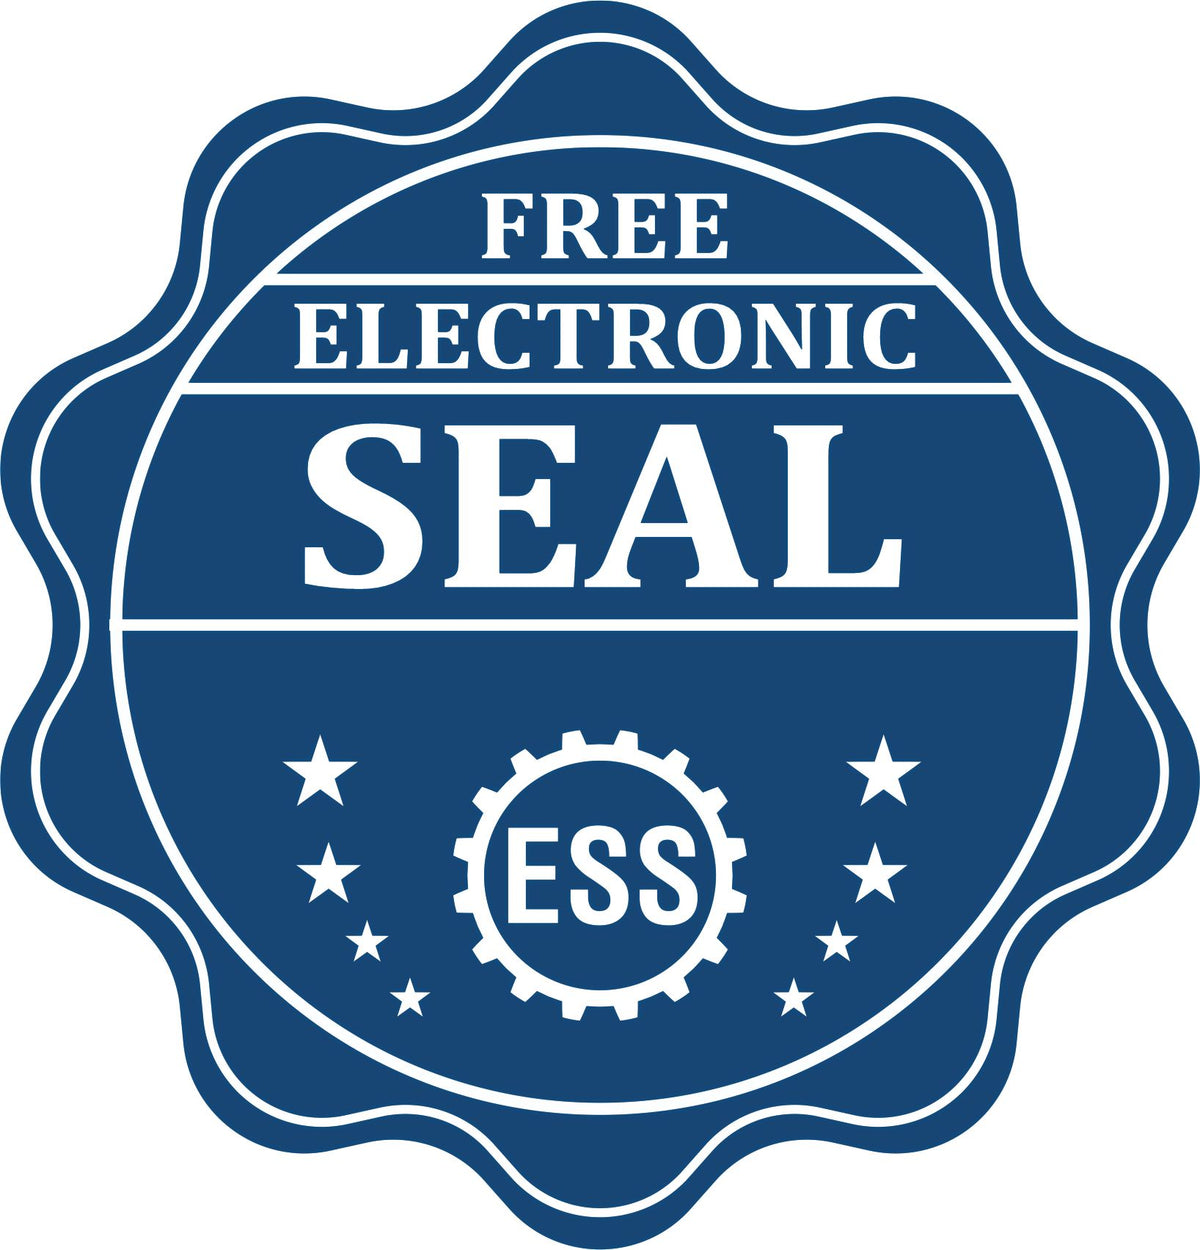 A badge showing a free electronic seal for the Iowa Geologist Desk Seal with stars and the ESS gear on the emblem.